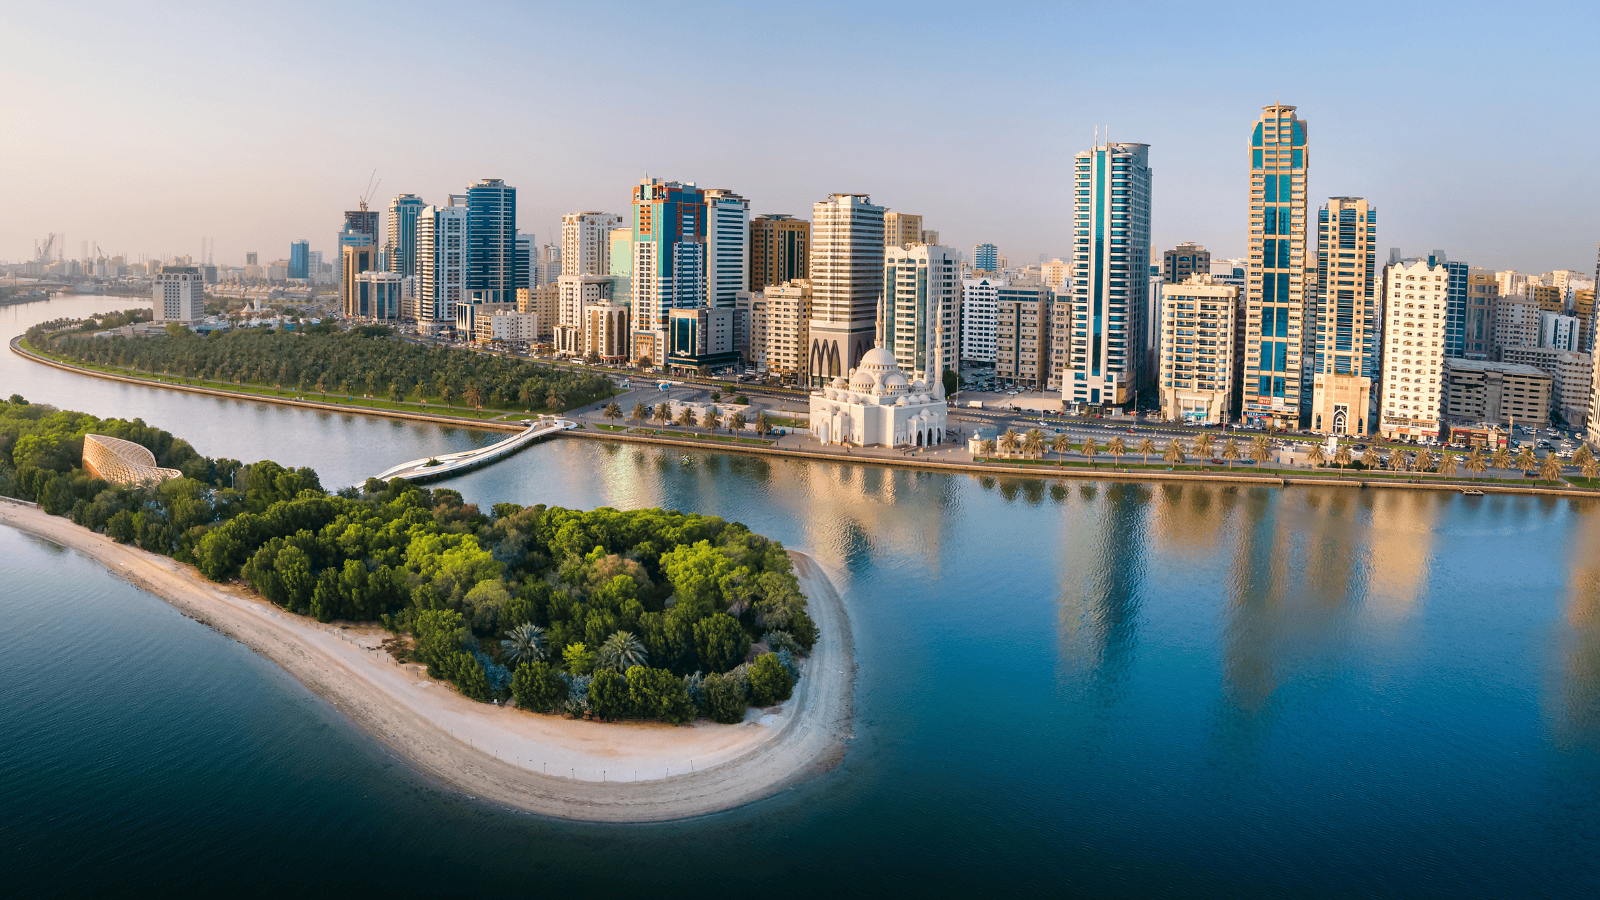 <p>The next time you’re in the UAE, opt for Sharjah over Dubai. Sharjah is the country’s third-most populous city and has a reputation for being fun and family-oriented.</p><p>Here, you can experience everything from desert safaris to one-of-a-kind art galleries. Travelers can witness Sharjah’s rich cultural heritage at the Al Noor Mosque and the Sharjah Museum of Islamic Civilization.</p>